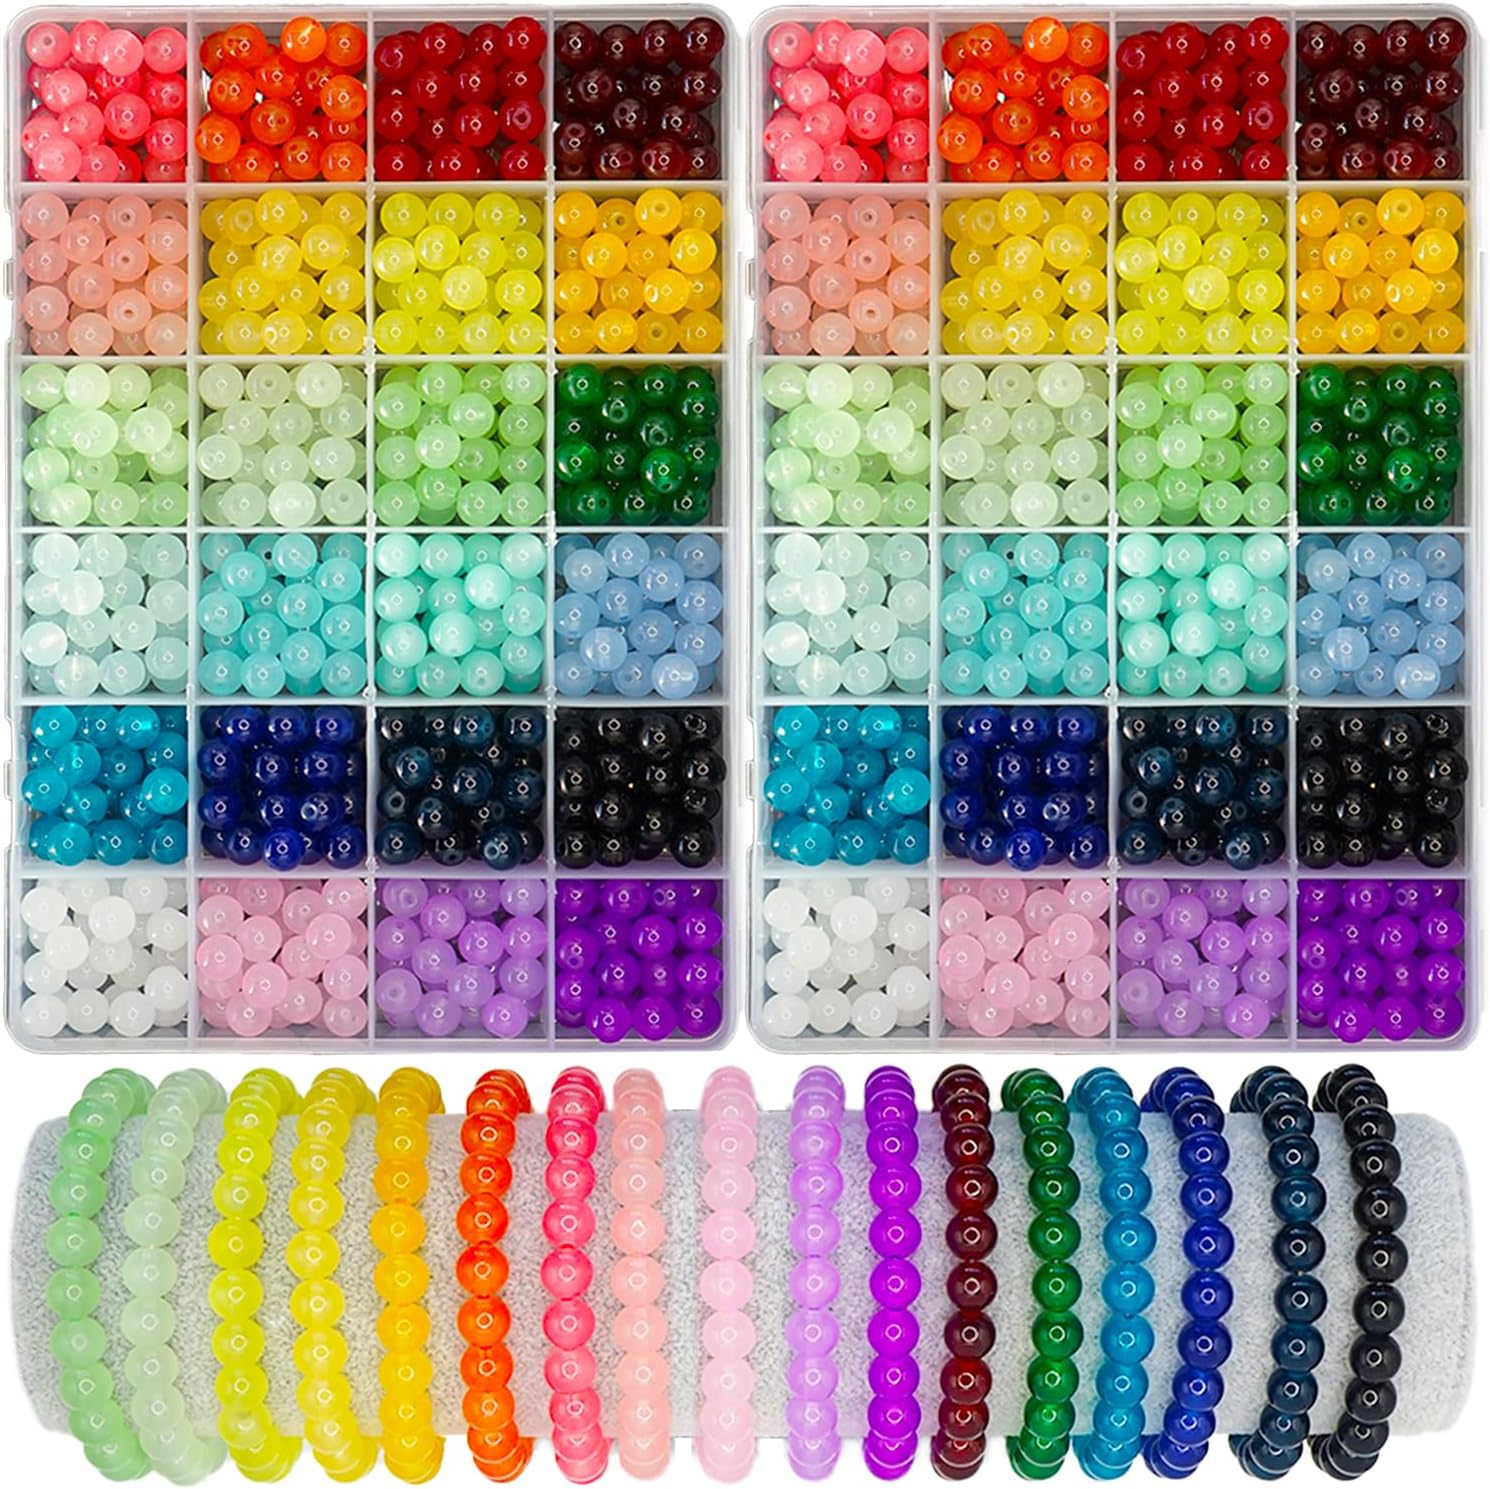  The Beadery Bonanza 5LB of Mixed Craft Beads, Sizes, Plastic,  Round, Multicolor